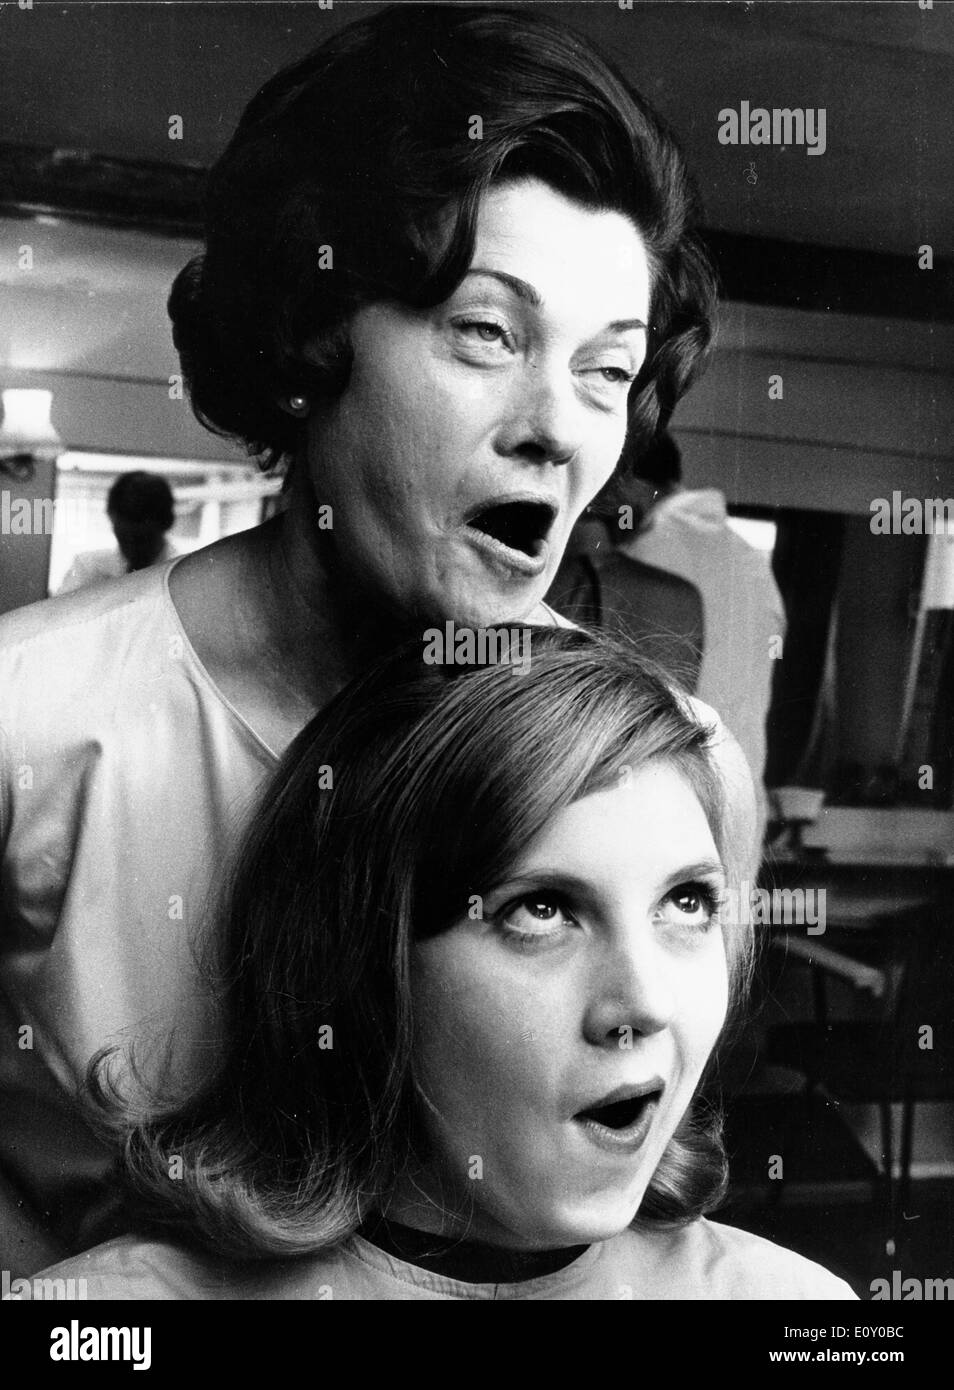 Women making funny faces at beauty salon Stock Photo